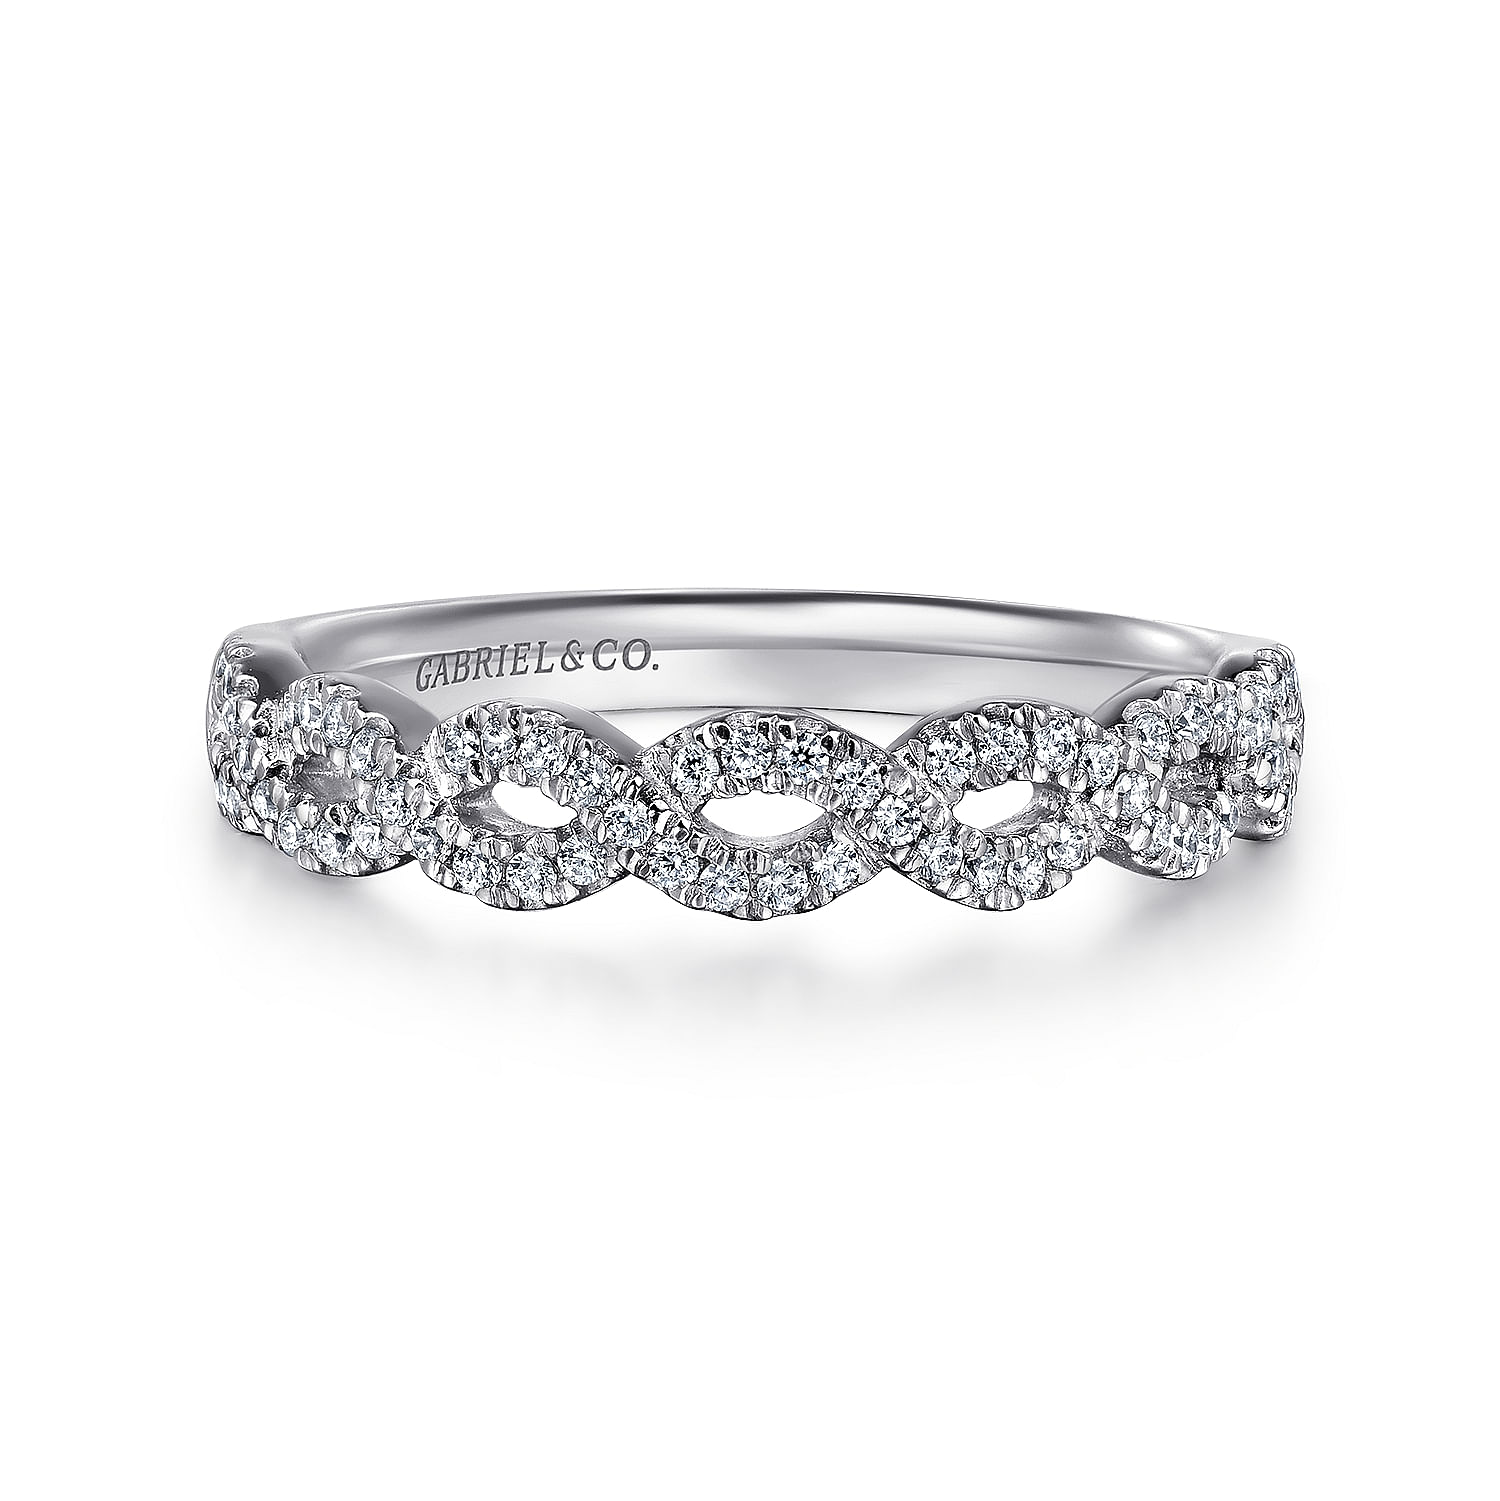 Treviso - Twisted-14K White Gold Twisted Diamond Anniversary Band